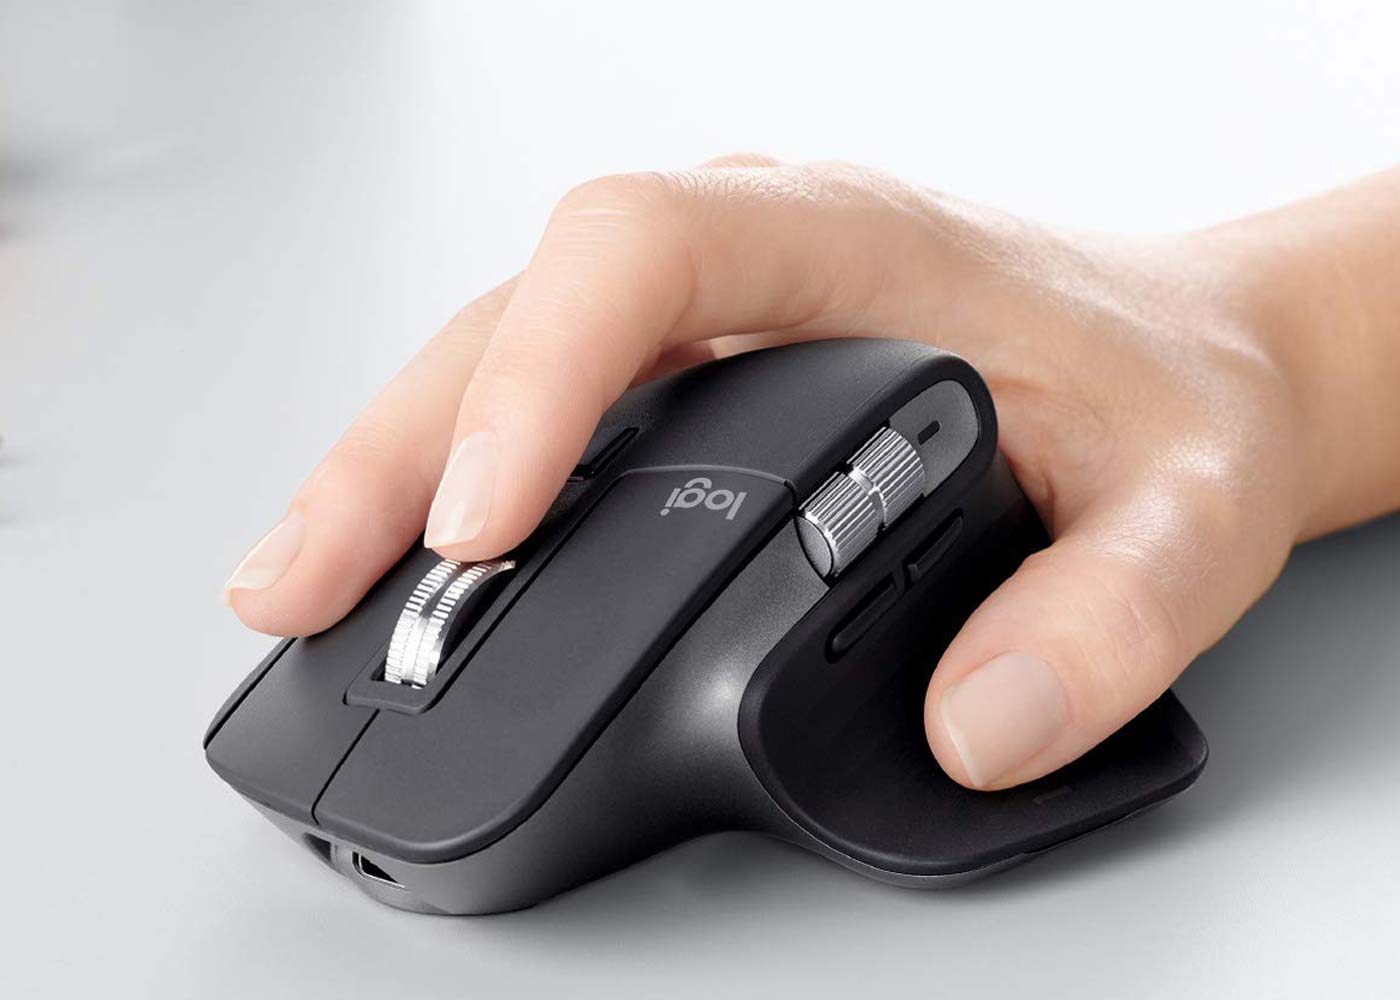 Best Mouse for Graphic Design